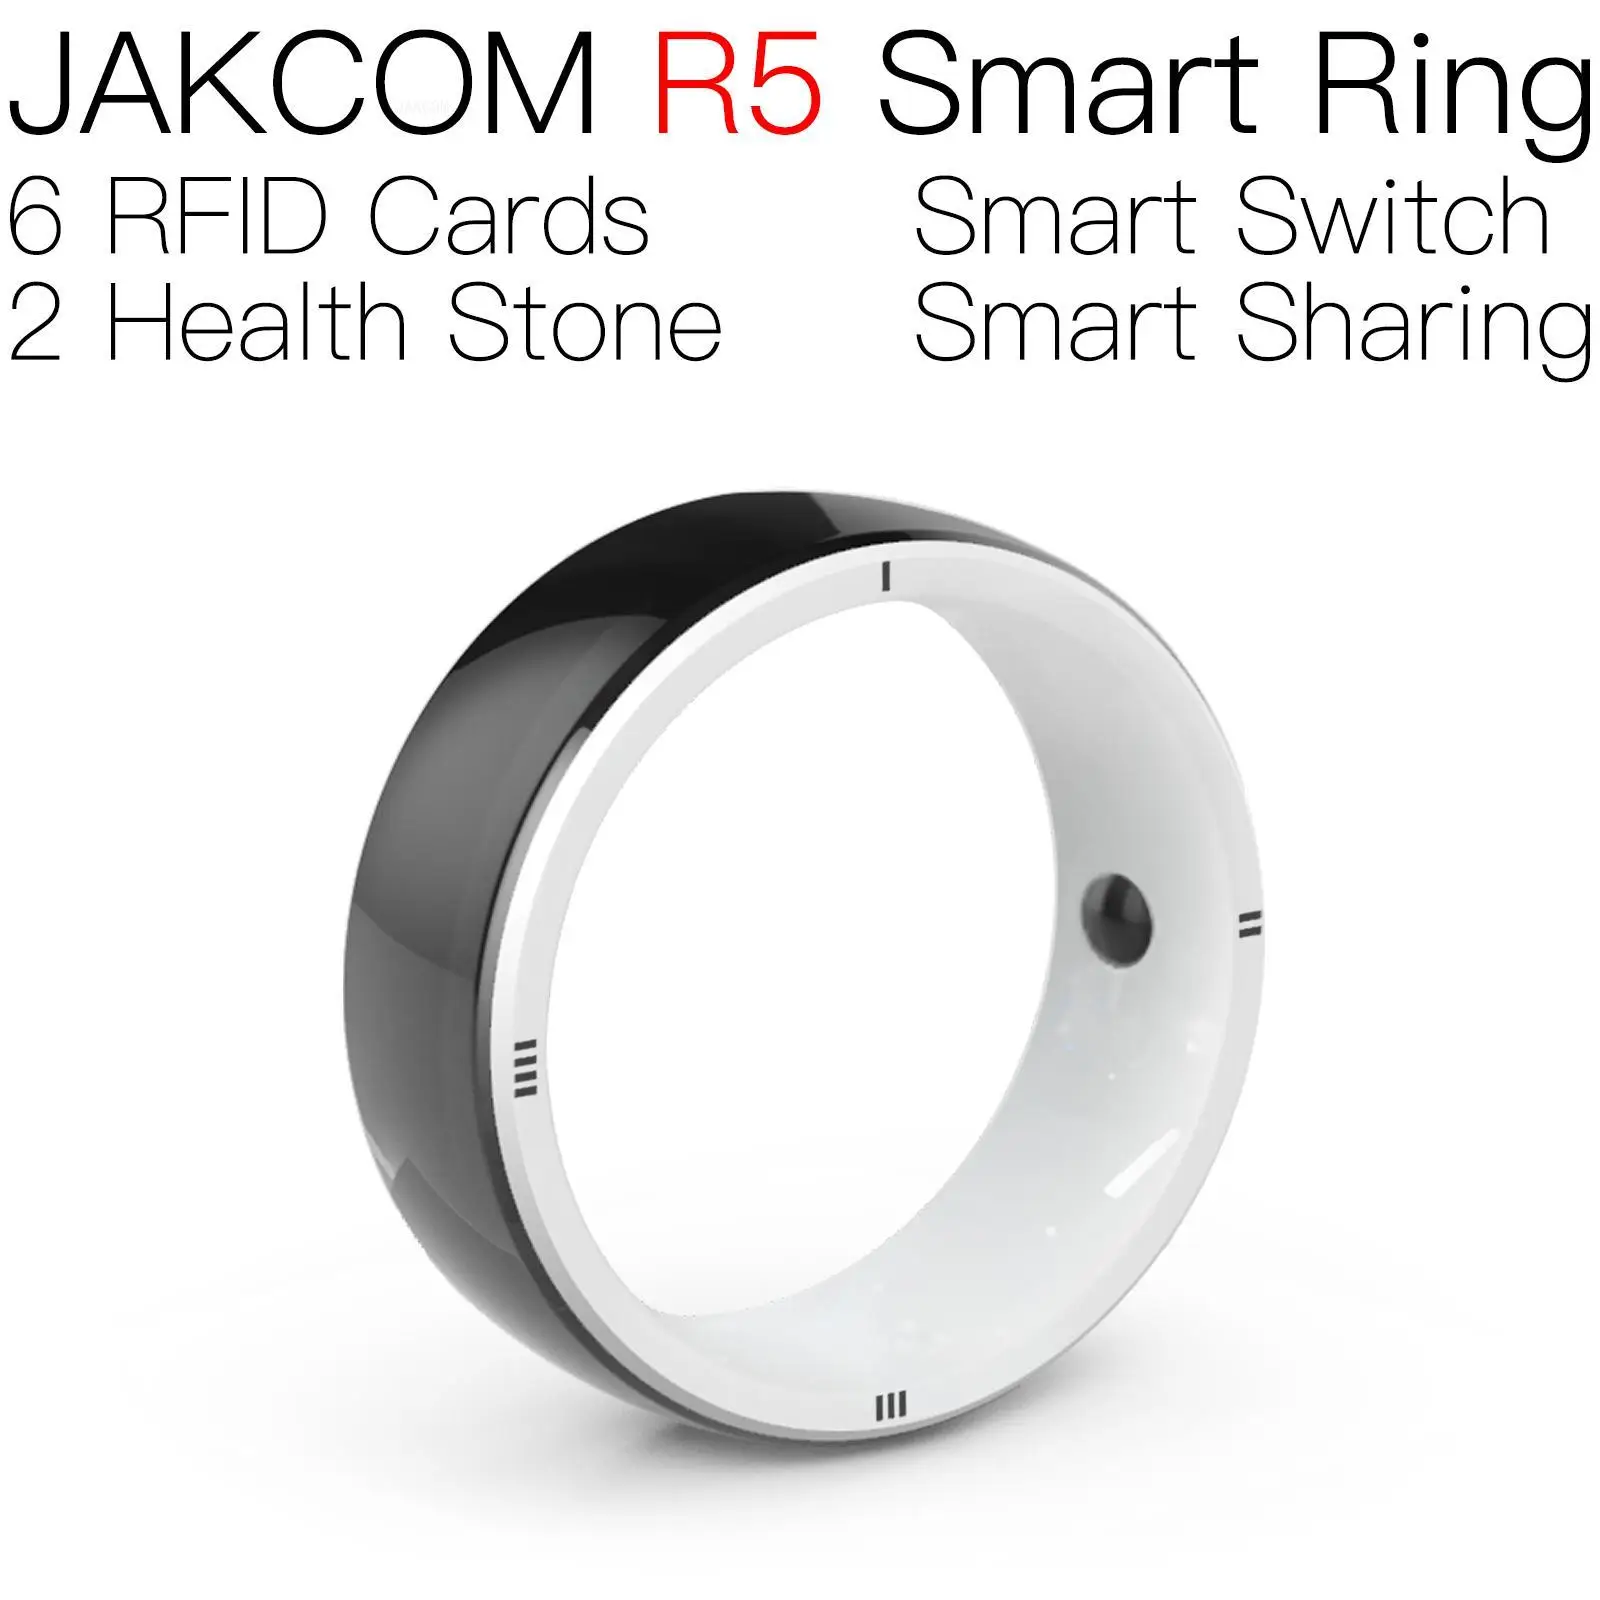 

JAKCOM R5 Smart Ring New product as rfid card cob chip 100pcs nfc for smartphone payment method manette switch charon baby coil